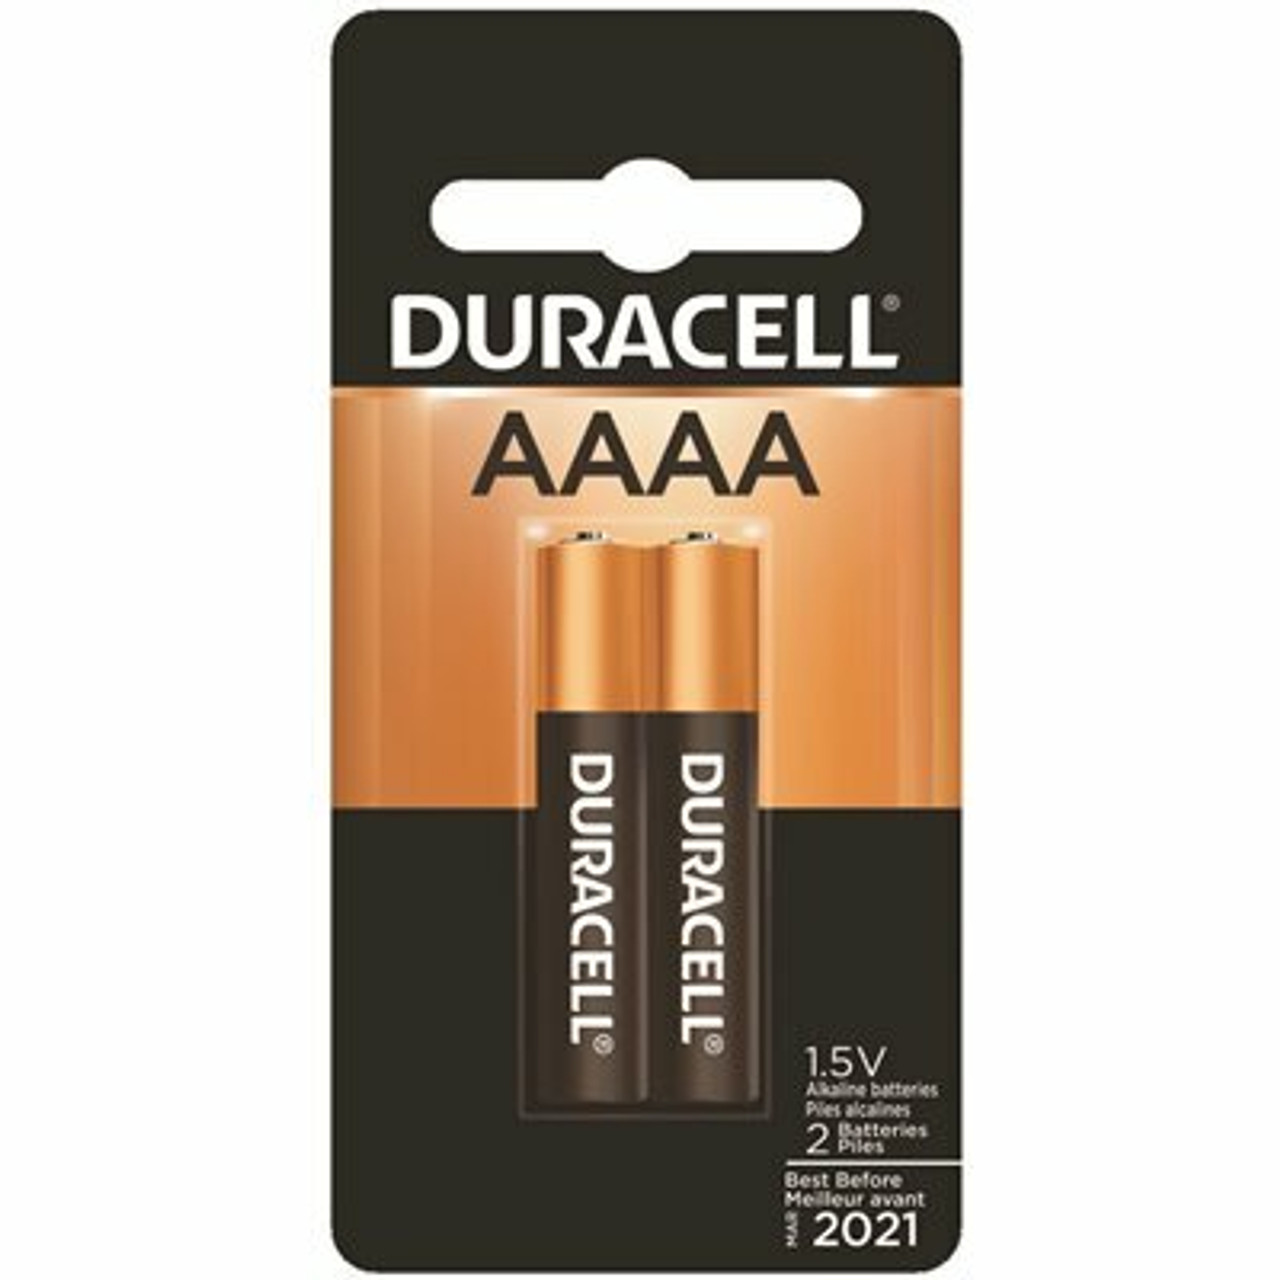 Duracell Coppertop Ultra Photo Aaaa Battery (2-Pack)